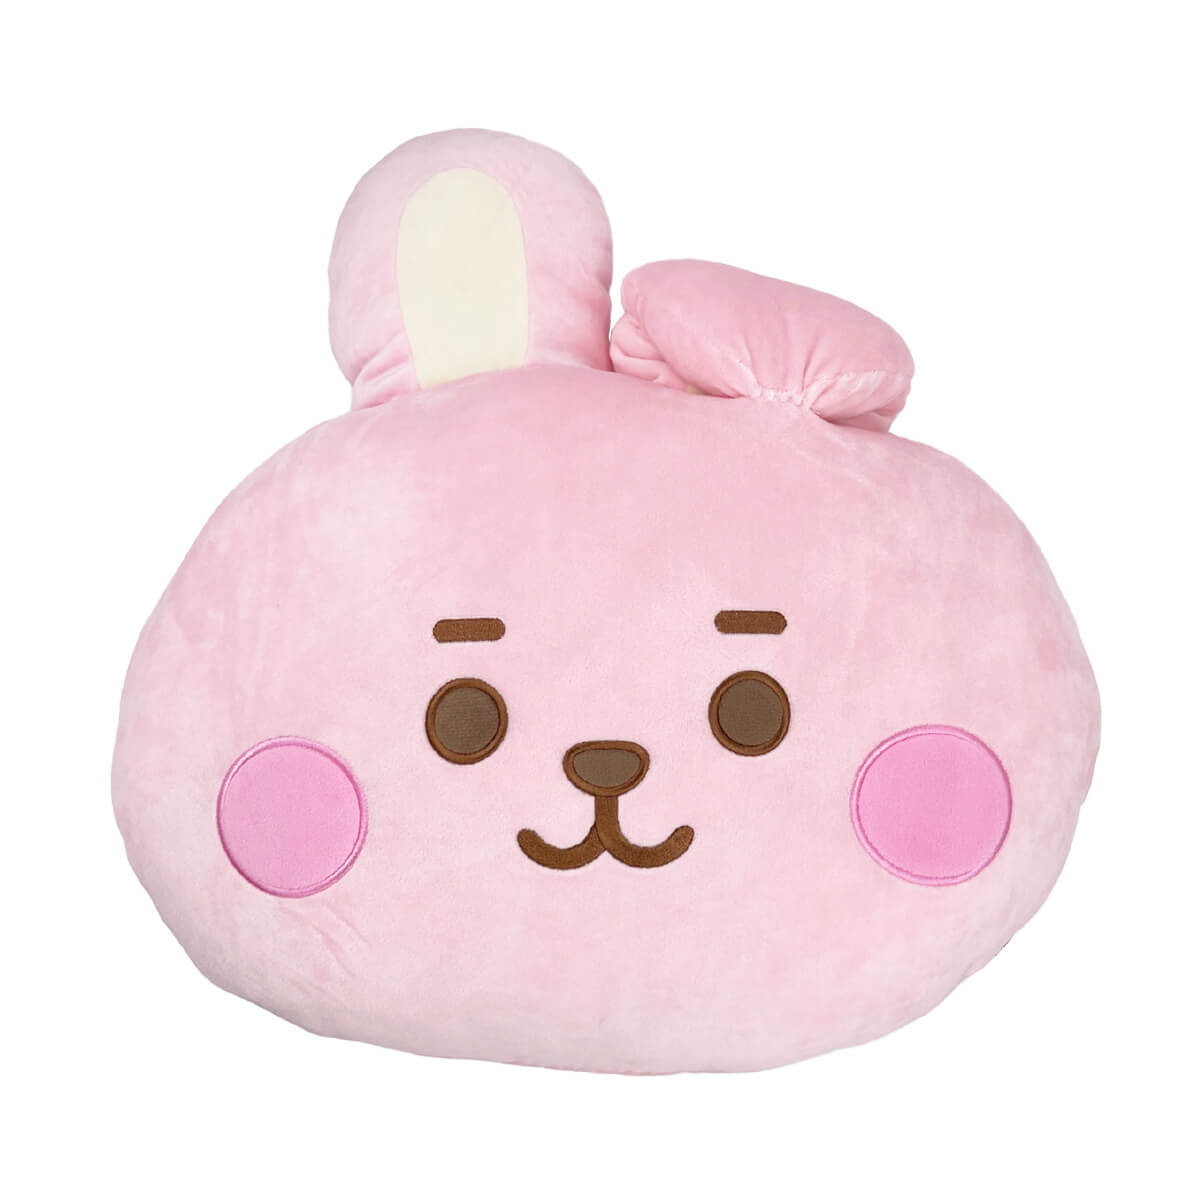 BT21 Official Edition Kpop BTS Emoji Pillow Cover with Pillow by Line  Friends